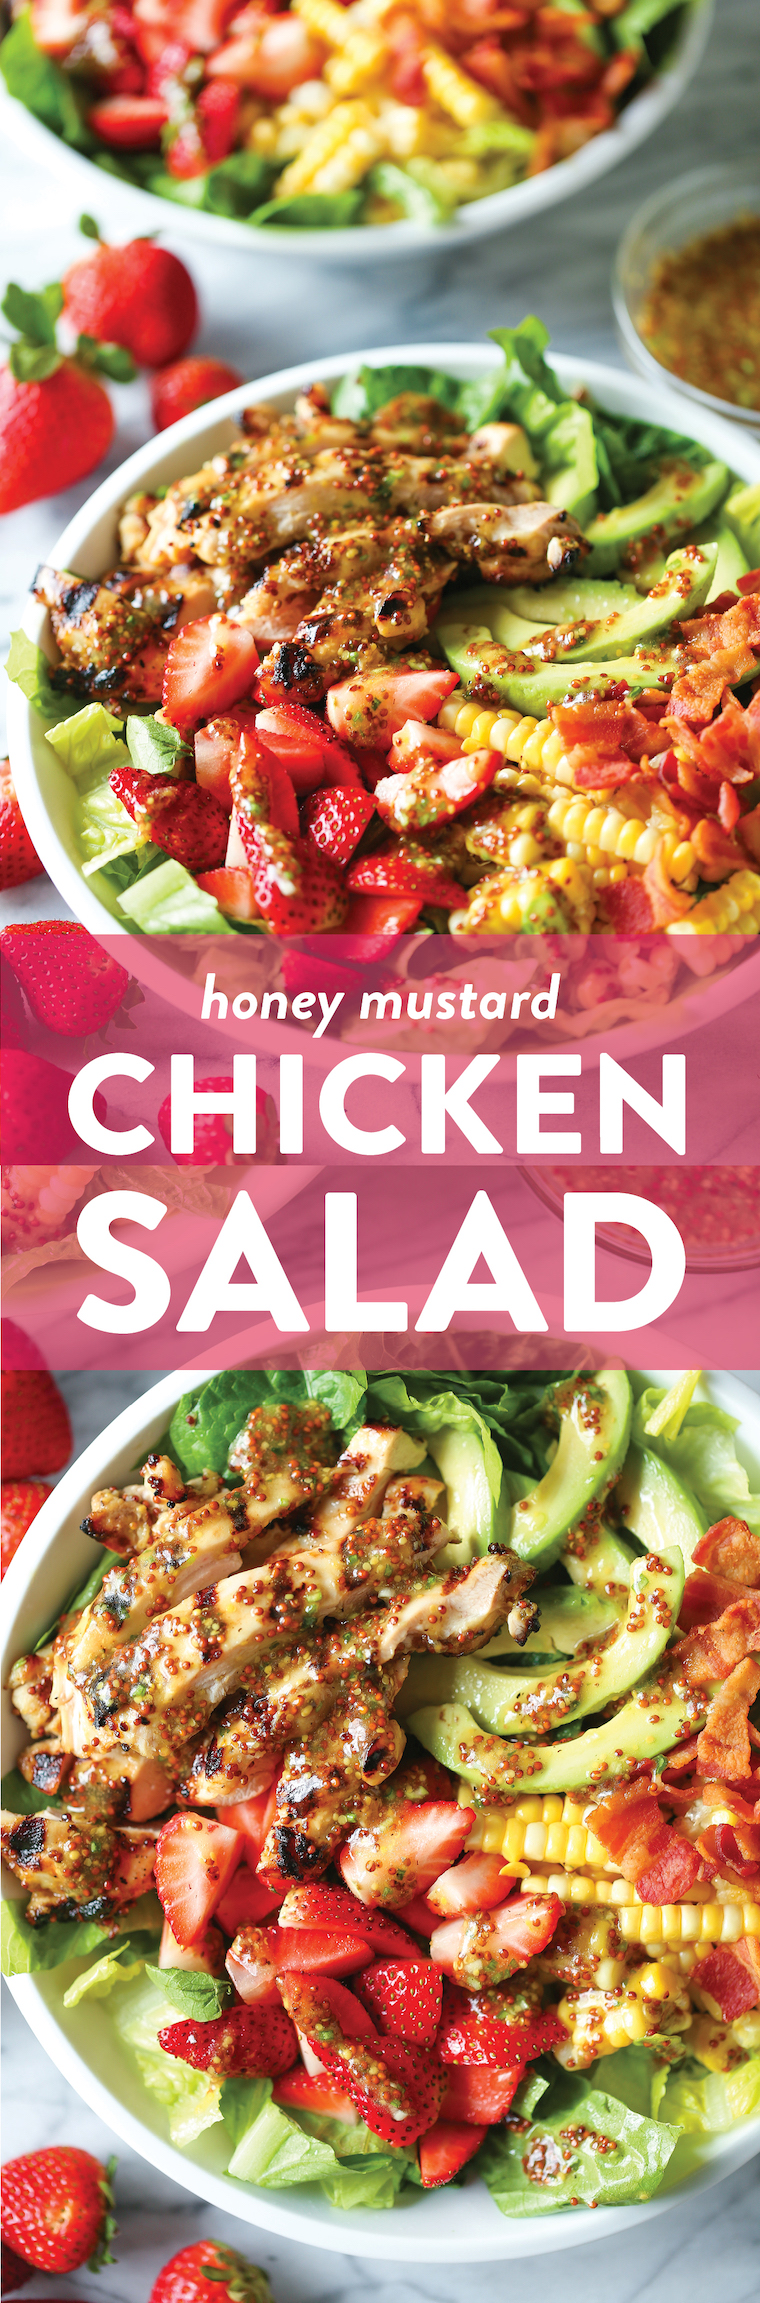 Honey Mustard Chicken Salad - Made with the juiciest, tender honey mustard chicken, romaine, strawberries, avocado and corn. And the dressing is perfection!